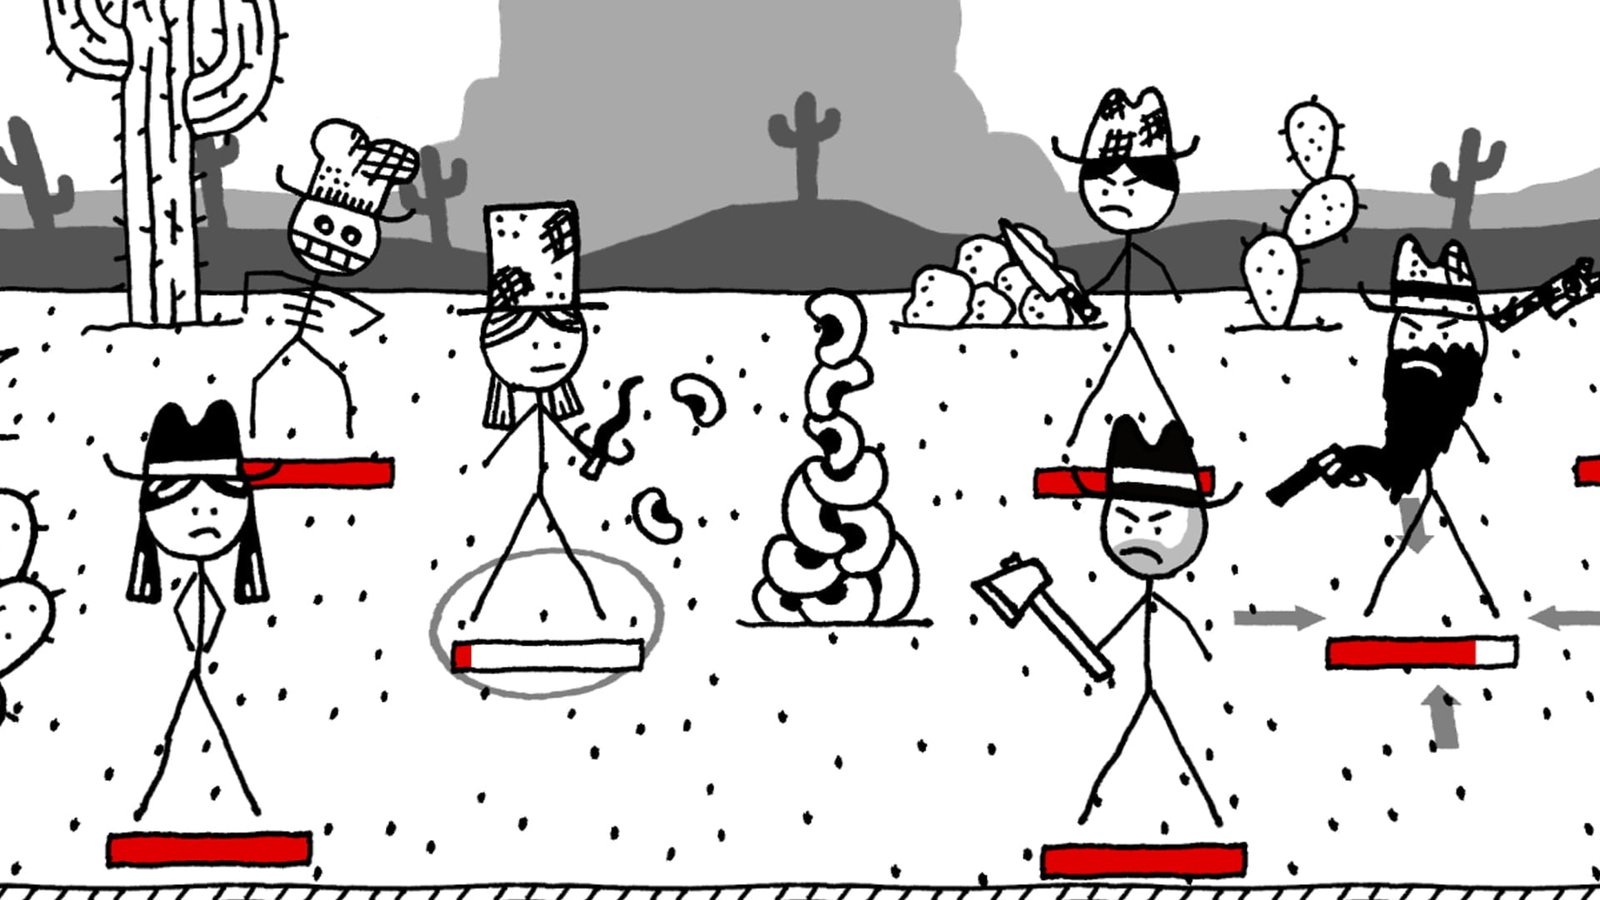 Review – West of Loathing